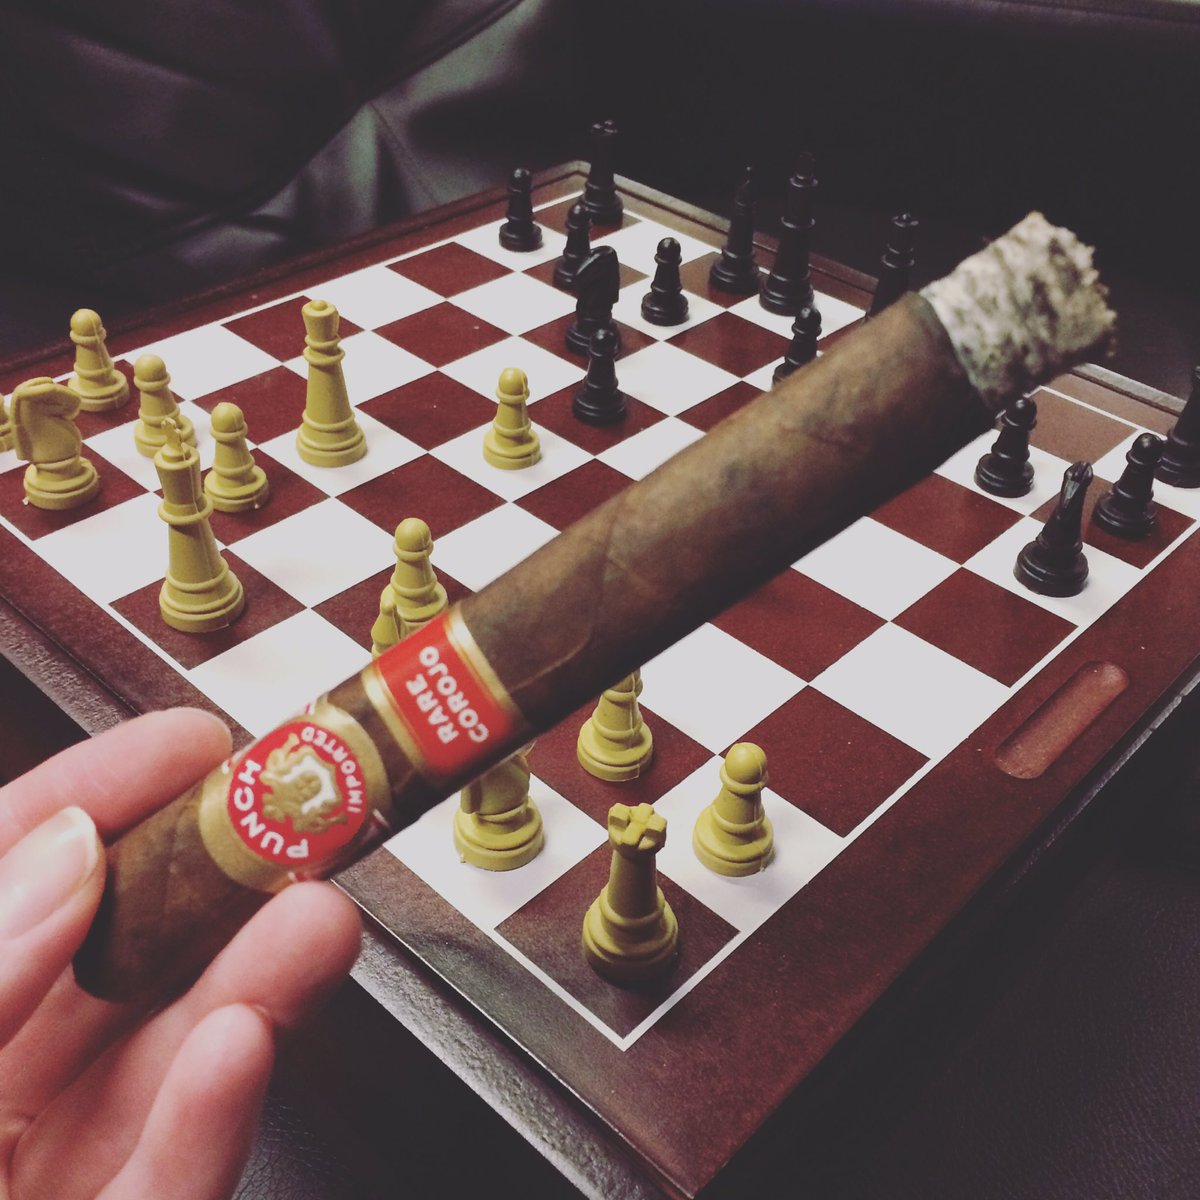 Rainy days are for #cigars and #chess! Enjoying a nice @punchcigars #rarecorojo that was a gift from a friend ❤️ #cigarlife #SotL #lovinlife